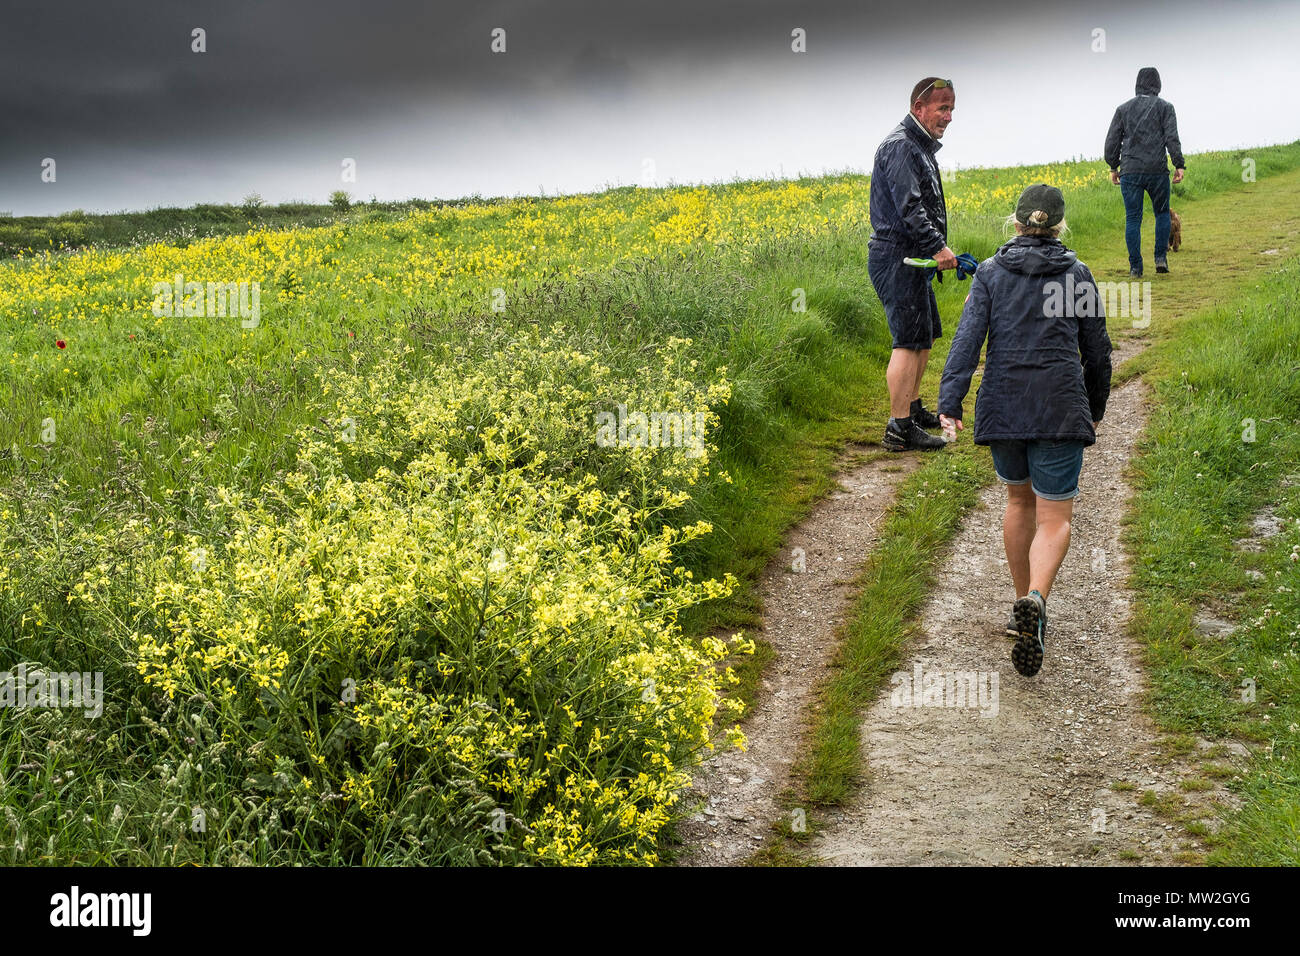 People walking along a footpath in a field of rapeseed Brassica napus and arable field wildflowers. Stock Photo